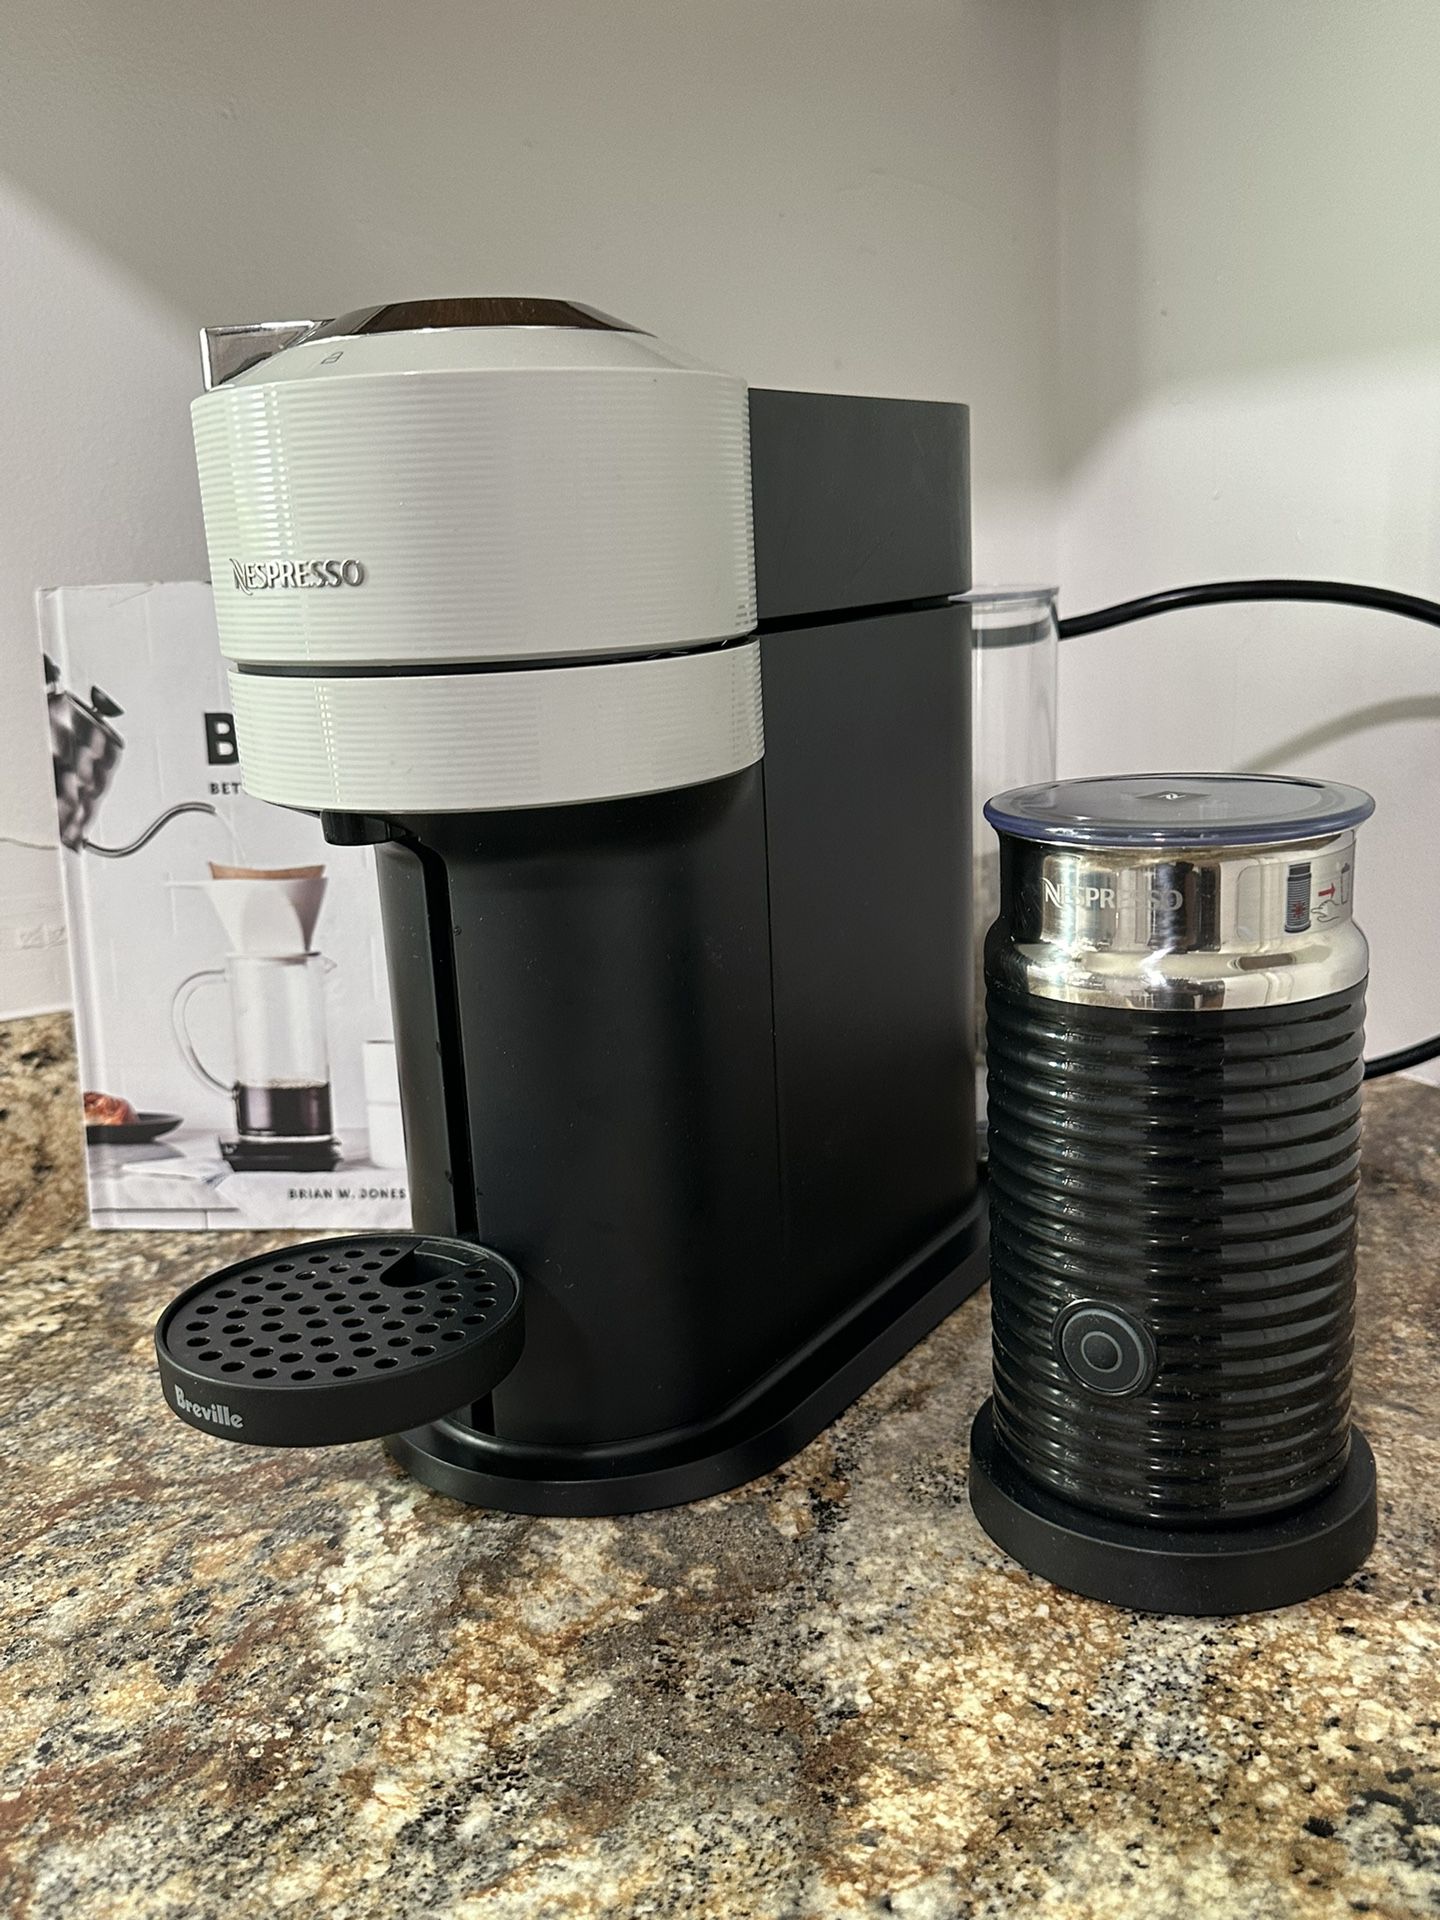 Elevate Your Mornings: Nespresso Vertuo Expresso & Coffee Machine with Milk Frother!